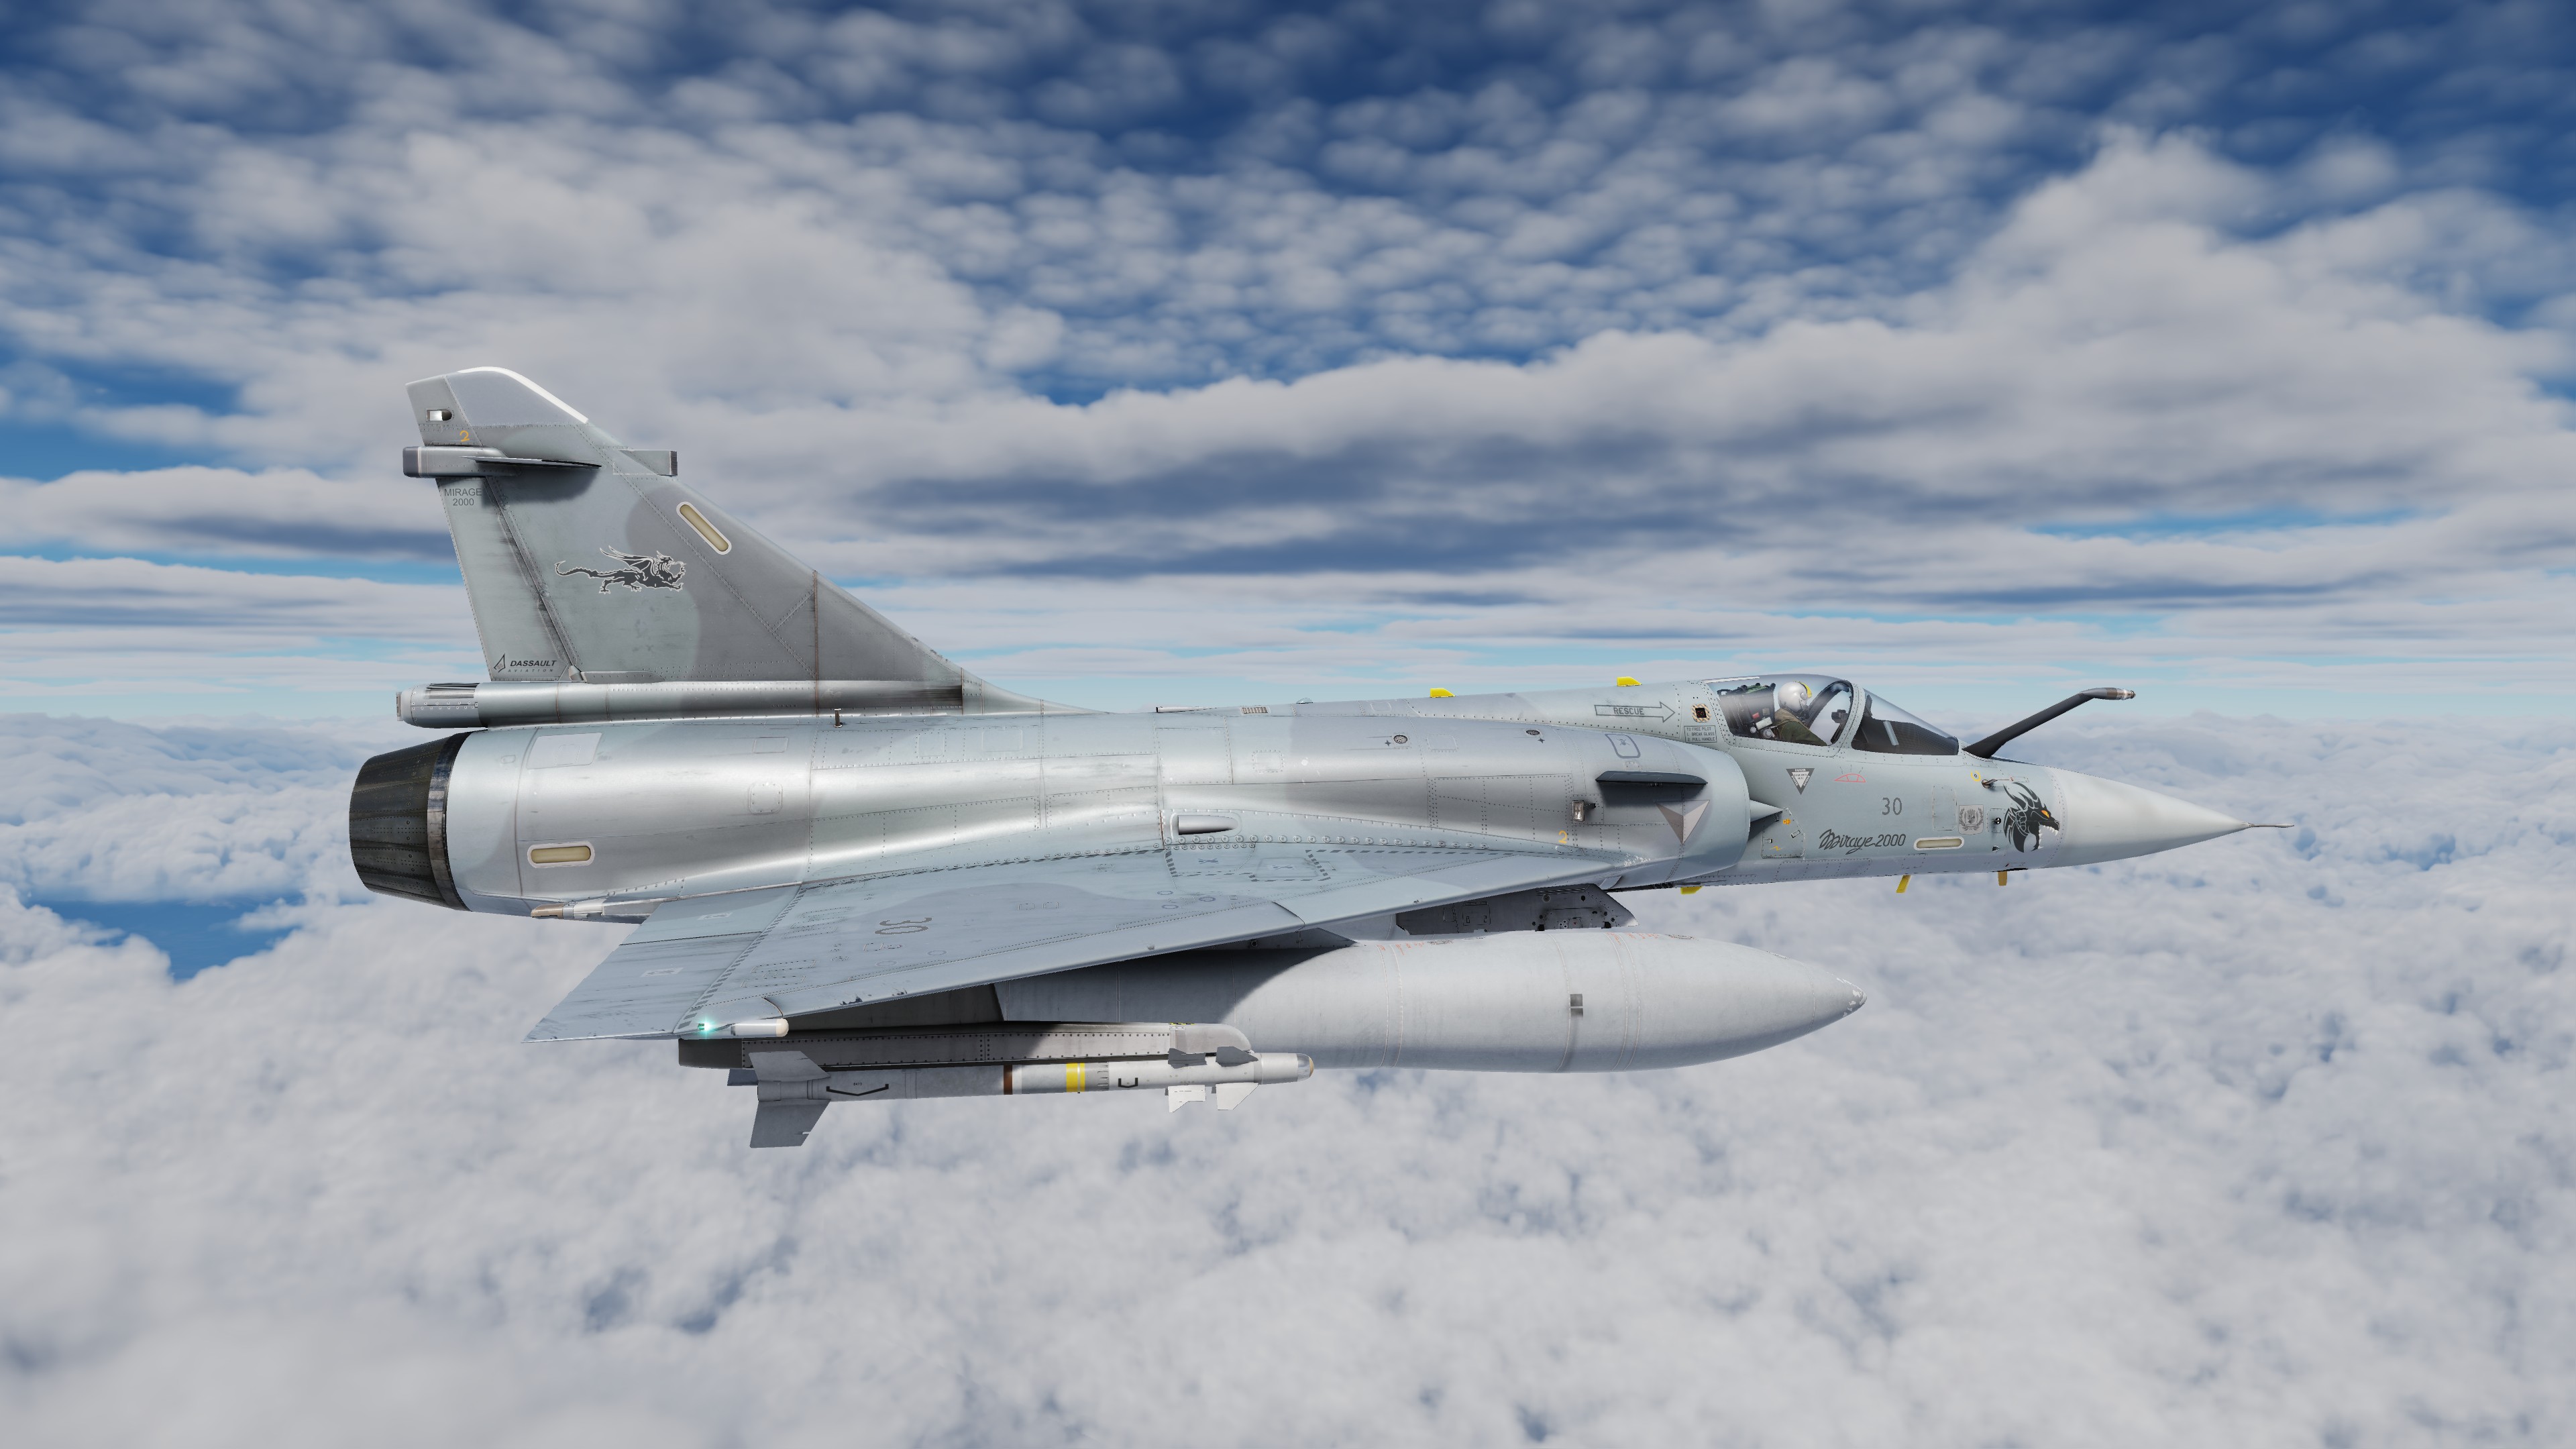 ACE COMBAT - M2000C - Nordennavic Royal Air Force V3 - Sqn "Cote d'Or" SPA65